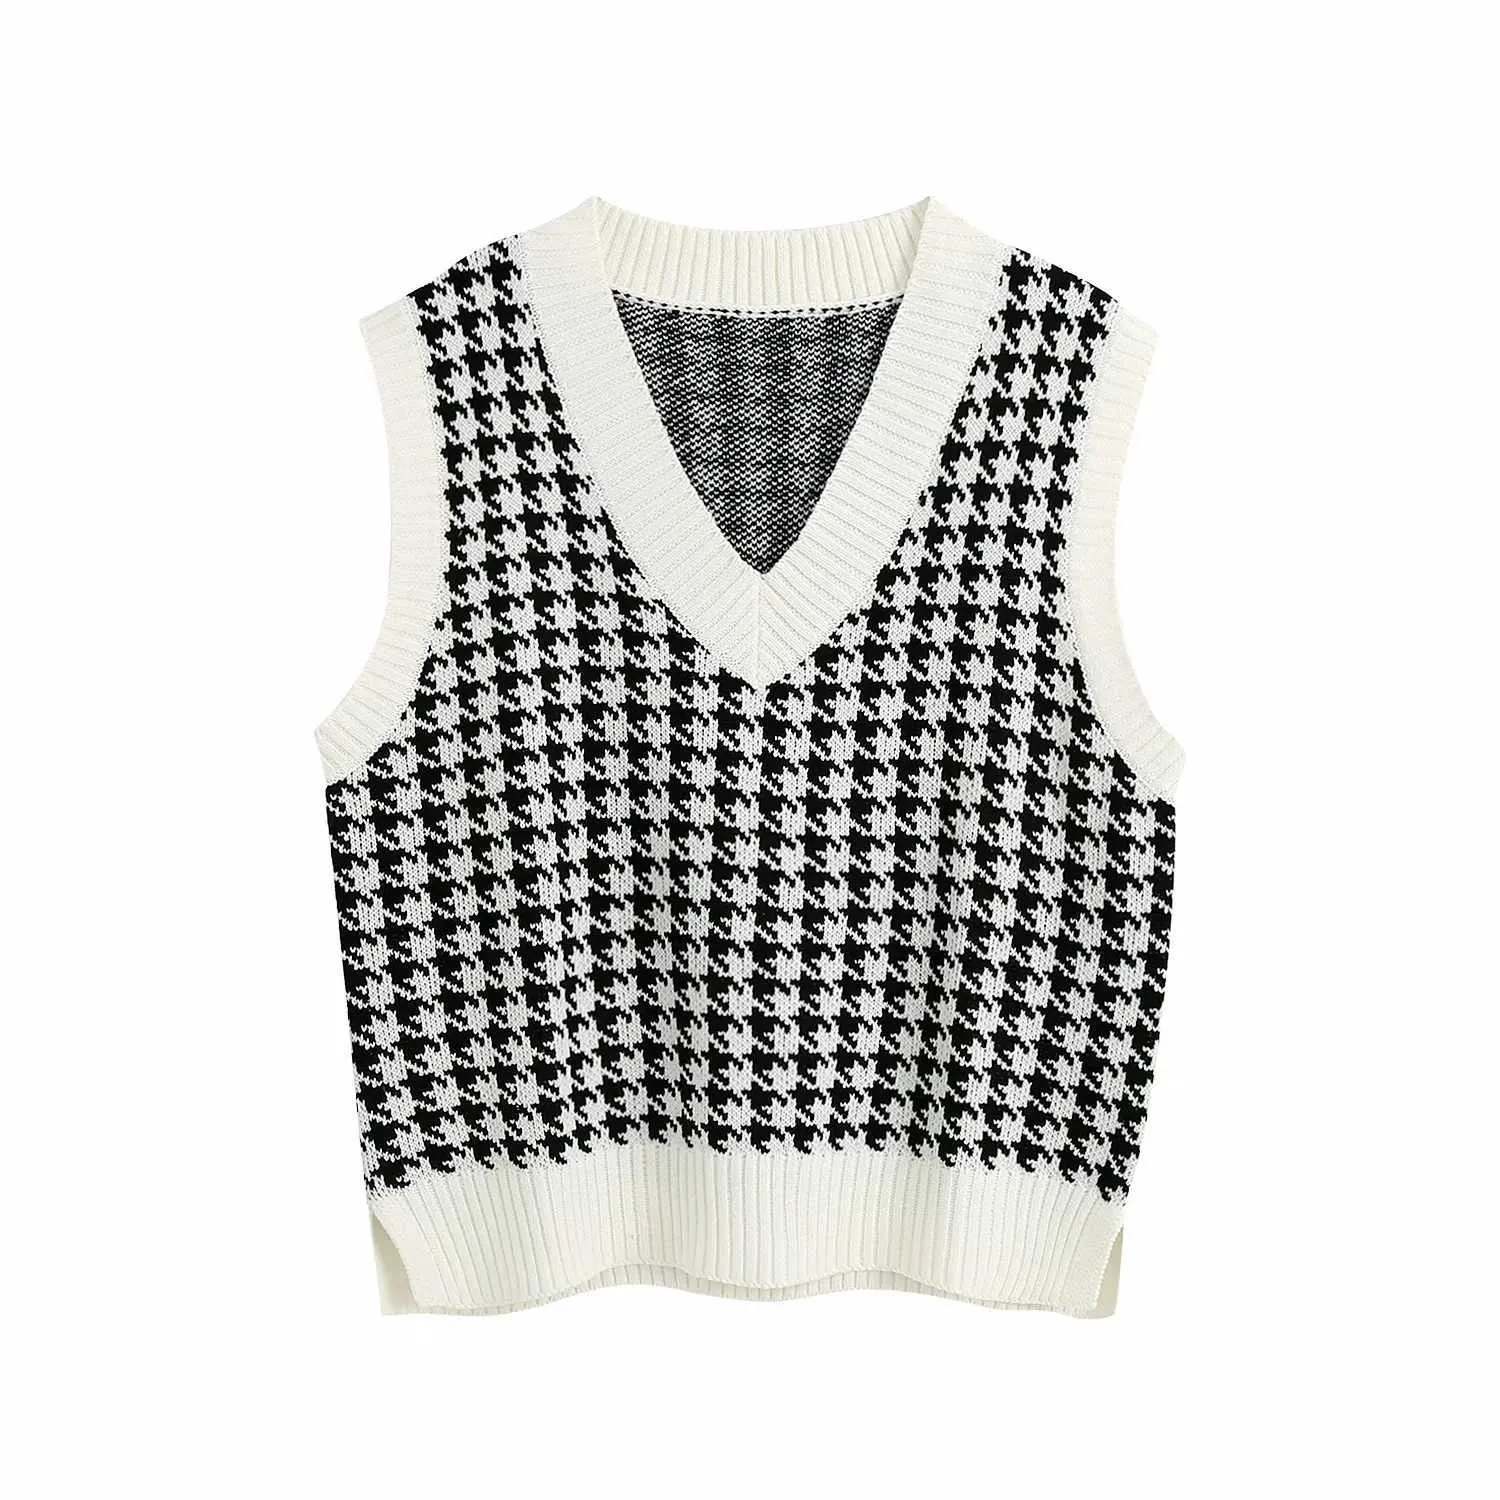 Fashion sleeveless vest sweater women pullover casual v neck knitted winter cute korean 211018